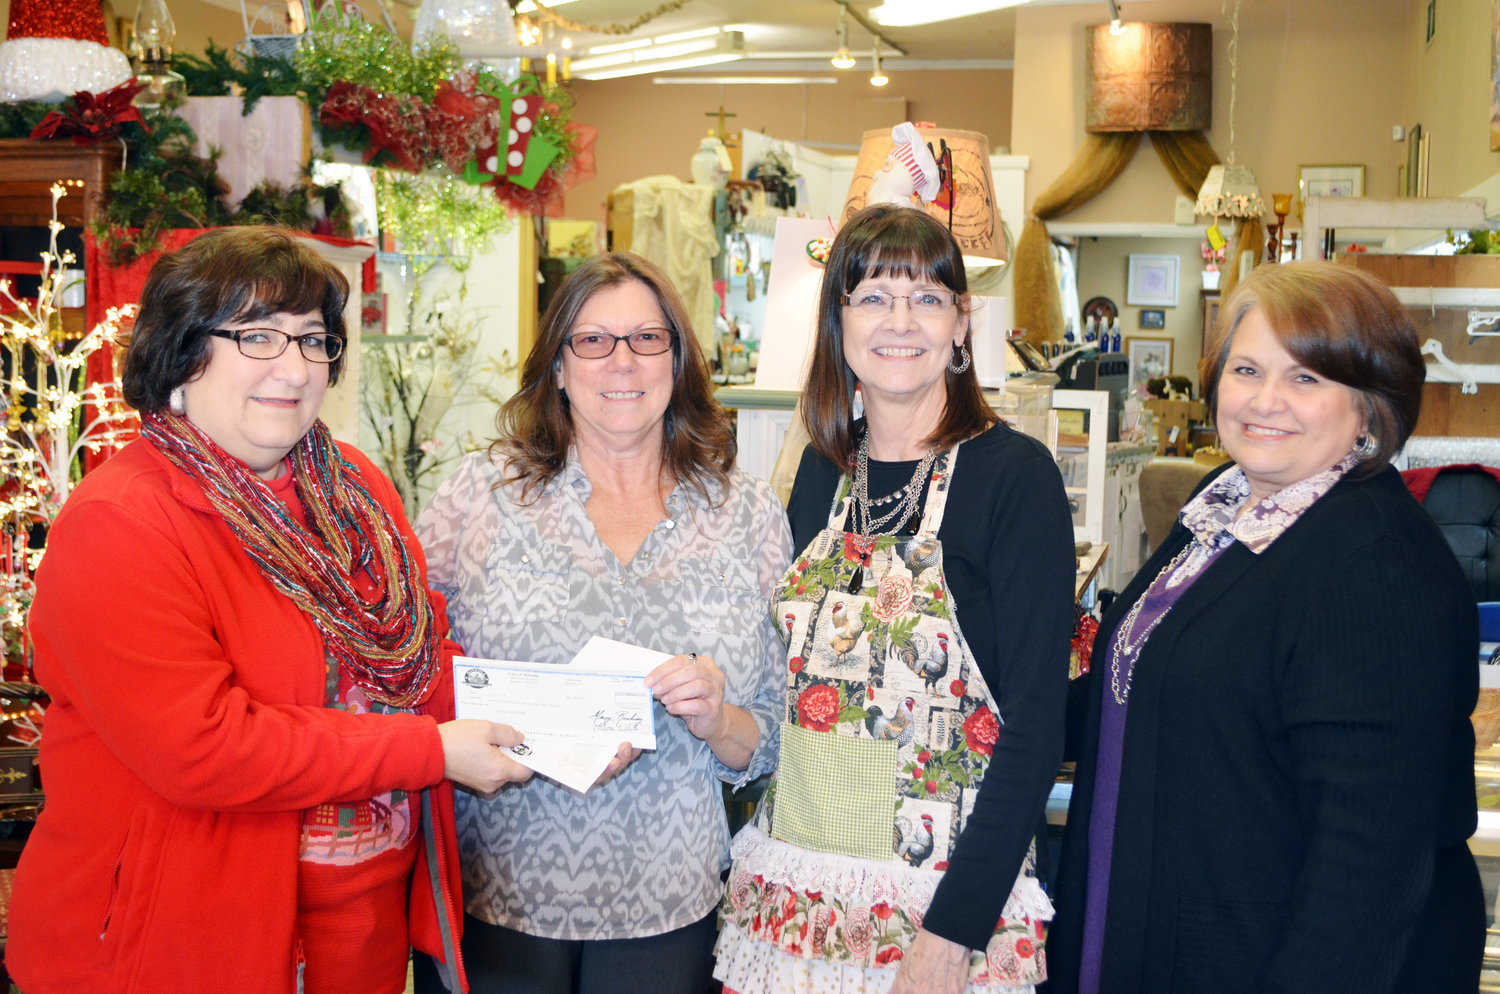 From left, Wanda Dubbs, president of the Mineola Main Street board, presents a $200 check to  Laura Edwards, a winner in the Shop Local Mineola contest, at Just Between Friends gift shop on Broad Street on Dec. 18. While shopping downtown, Edwards made a purchase at Just Between Friends and entered the receipt into the contest. Also pictured are Donna Hanger, owner of the Just Between Friends, and Lynn Kitchens, director of marketing for the City of Mineola. The campaign covers purchases made between Nov. 23-Dec. 28. To participate, you must make a purchase at a local restaurants and retail business (no “big box” stores or supermarkets). Taking a picture of your receipt, your purchase and where you got it and post it to Facebook with #ShopLocalMineolaTX. Or take your receipt or a copy to either Mineola Community Bank’s main branch, their Brookshire’s branch, the Chamber of Commerce or City Hall.